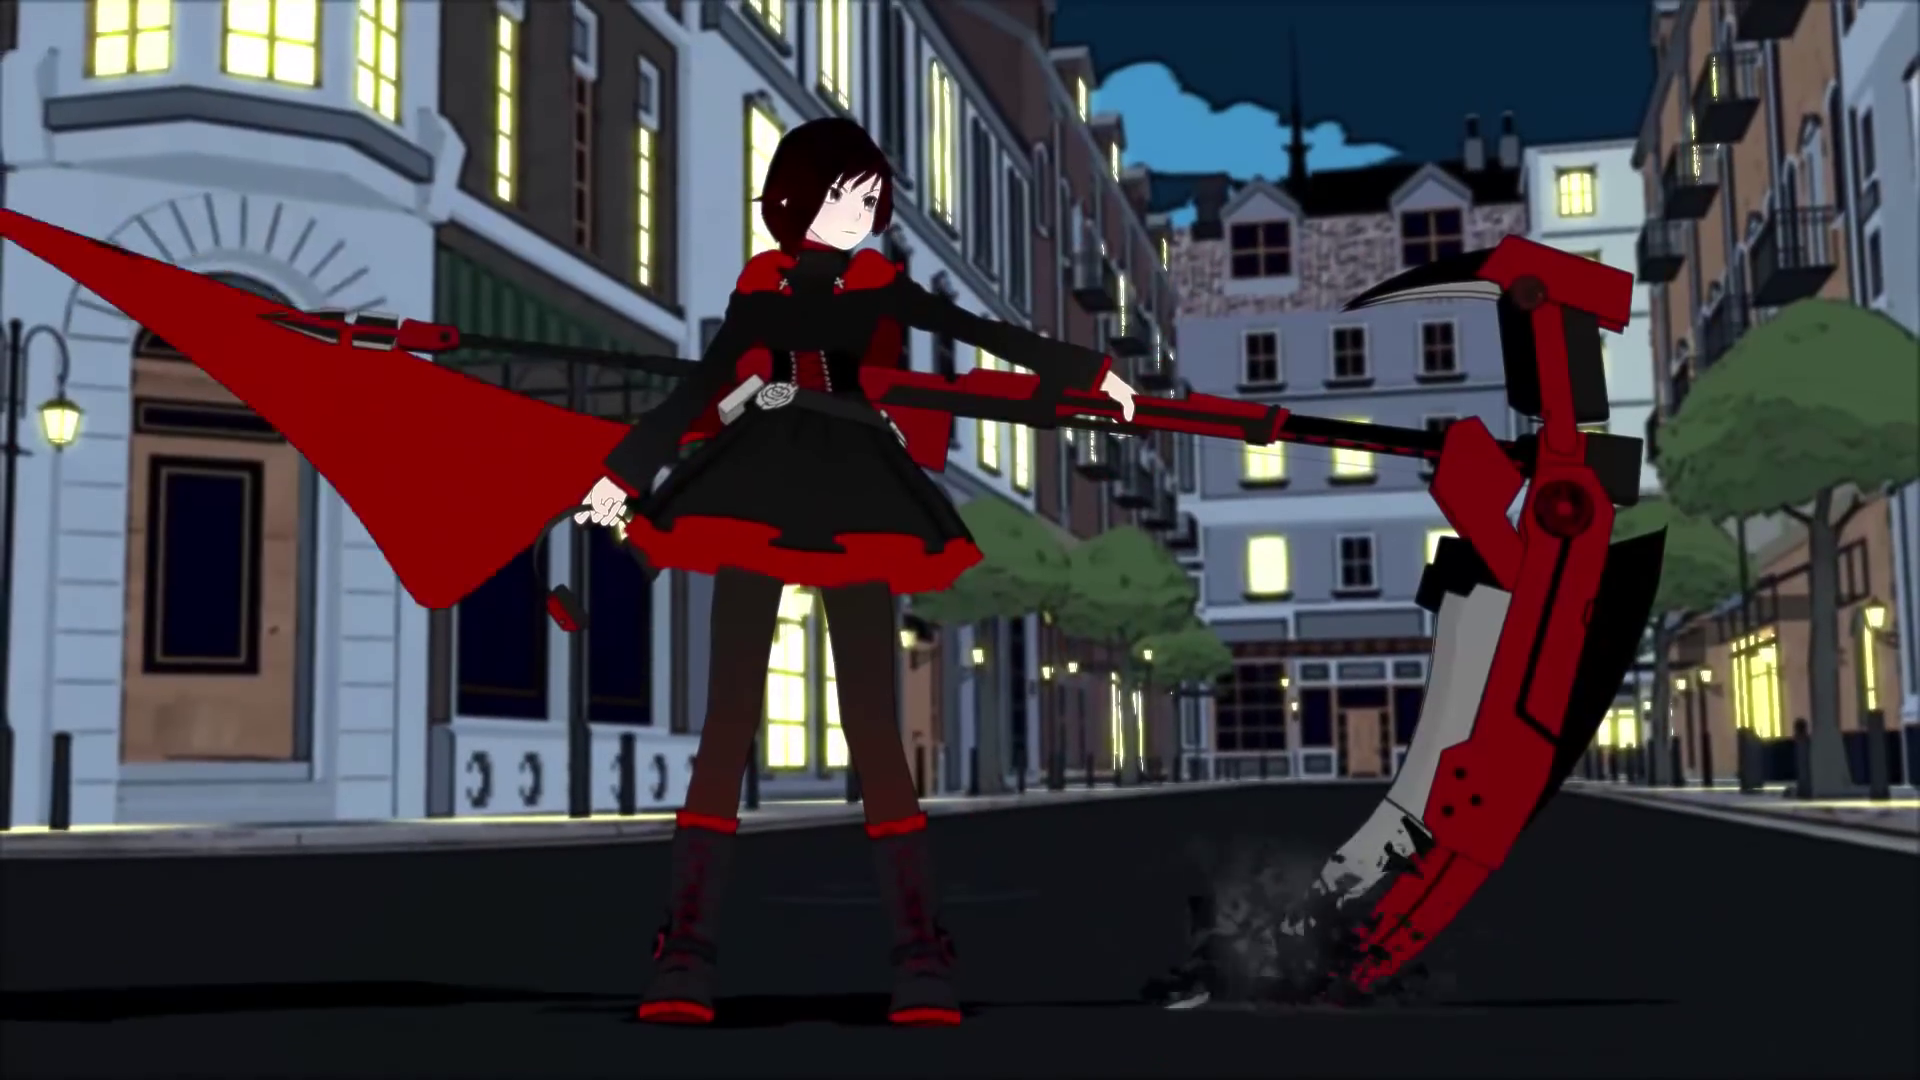 Too Long For Twitter Rwby Volume 1 Kickass Anime Action Or Watch monster under my bed, a line webtoon animated short on rooster teeth! too long for twitter tumblr